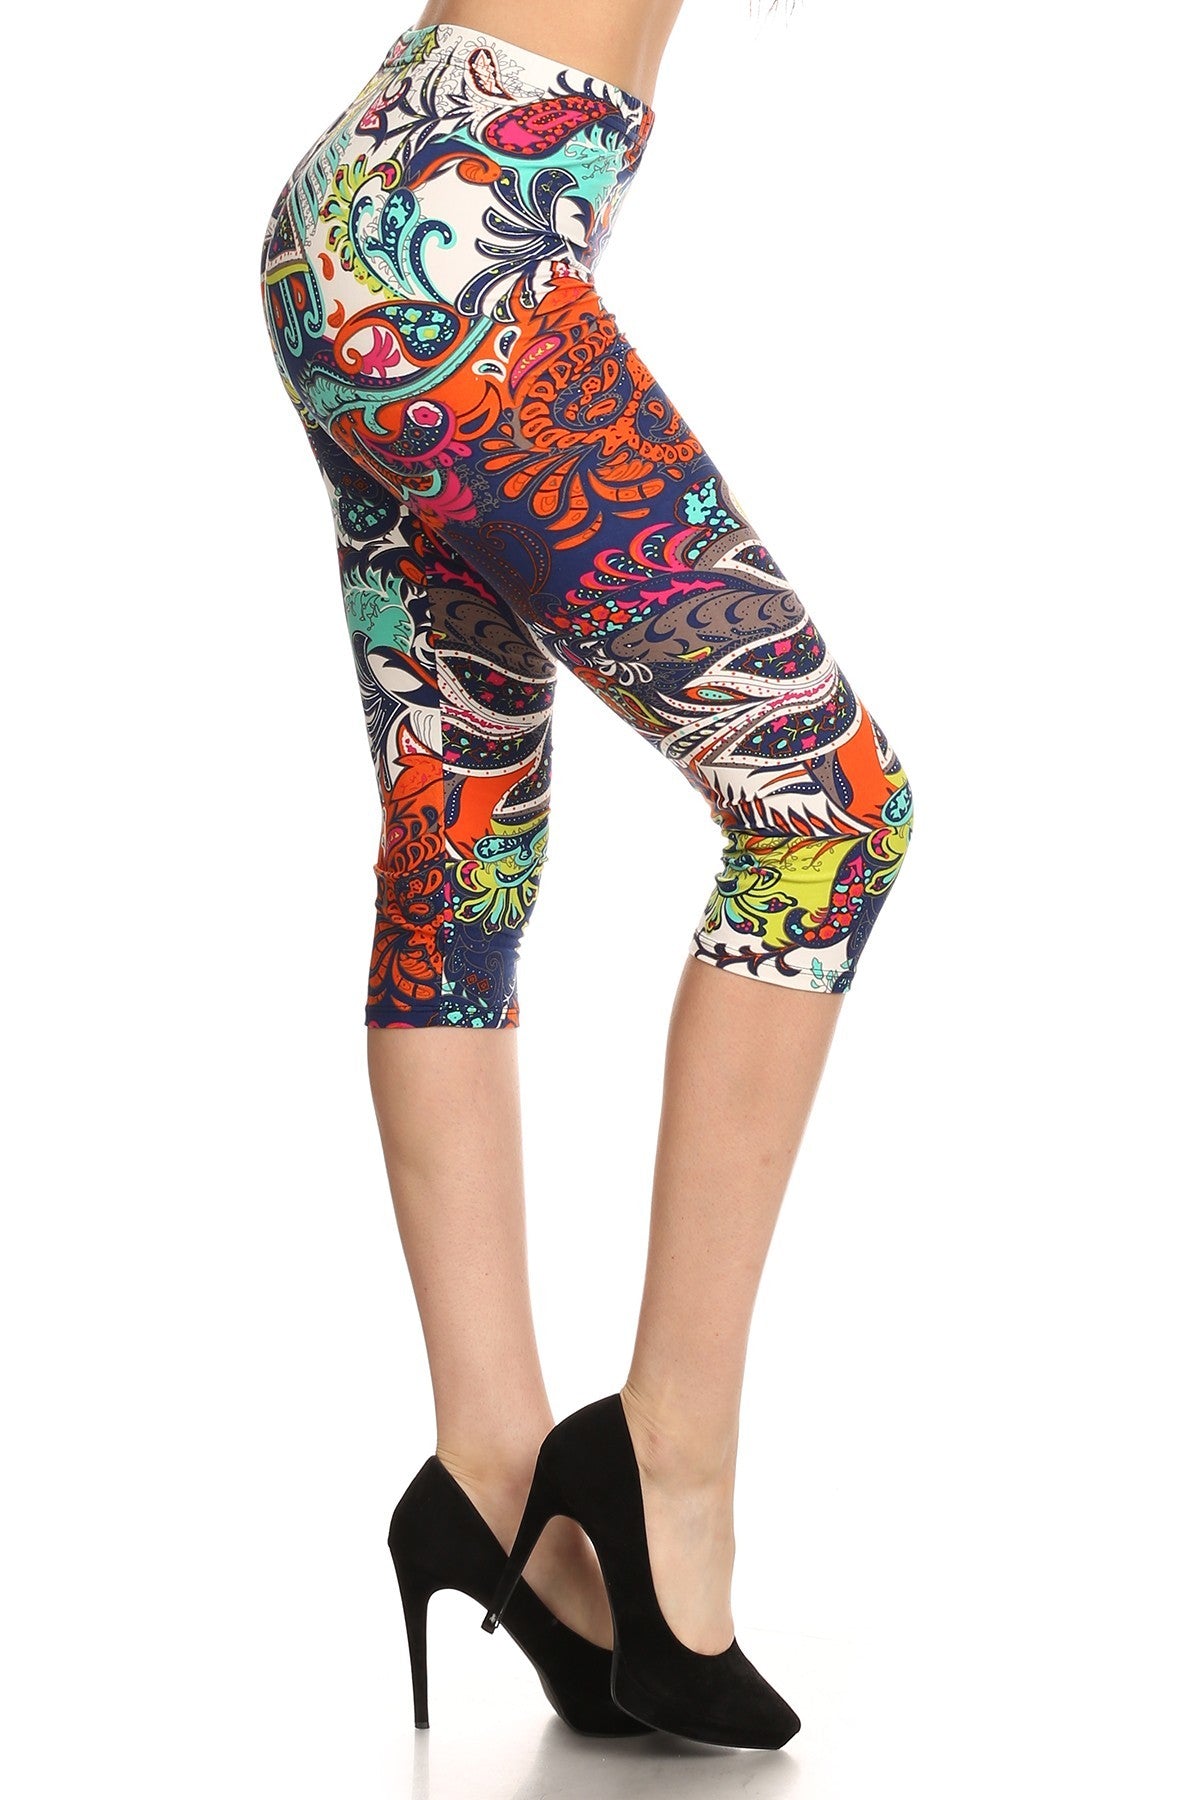 Multi-color Ornate Print Cropped Length Fitted Leggings With High Elastic Waist. Sunny EvE Fashion